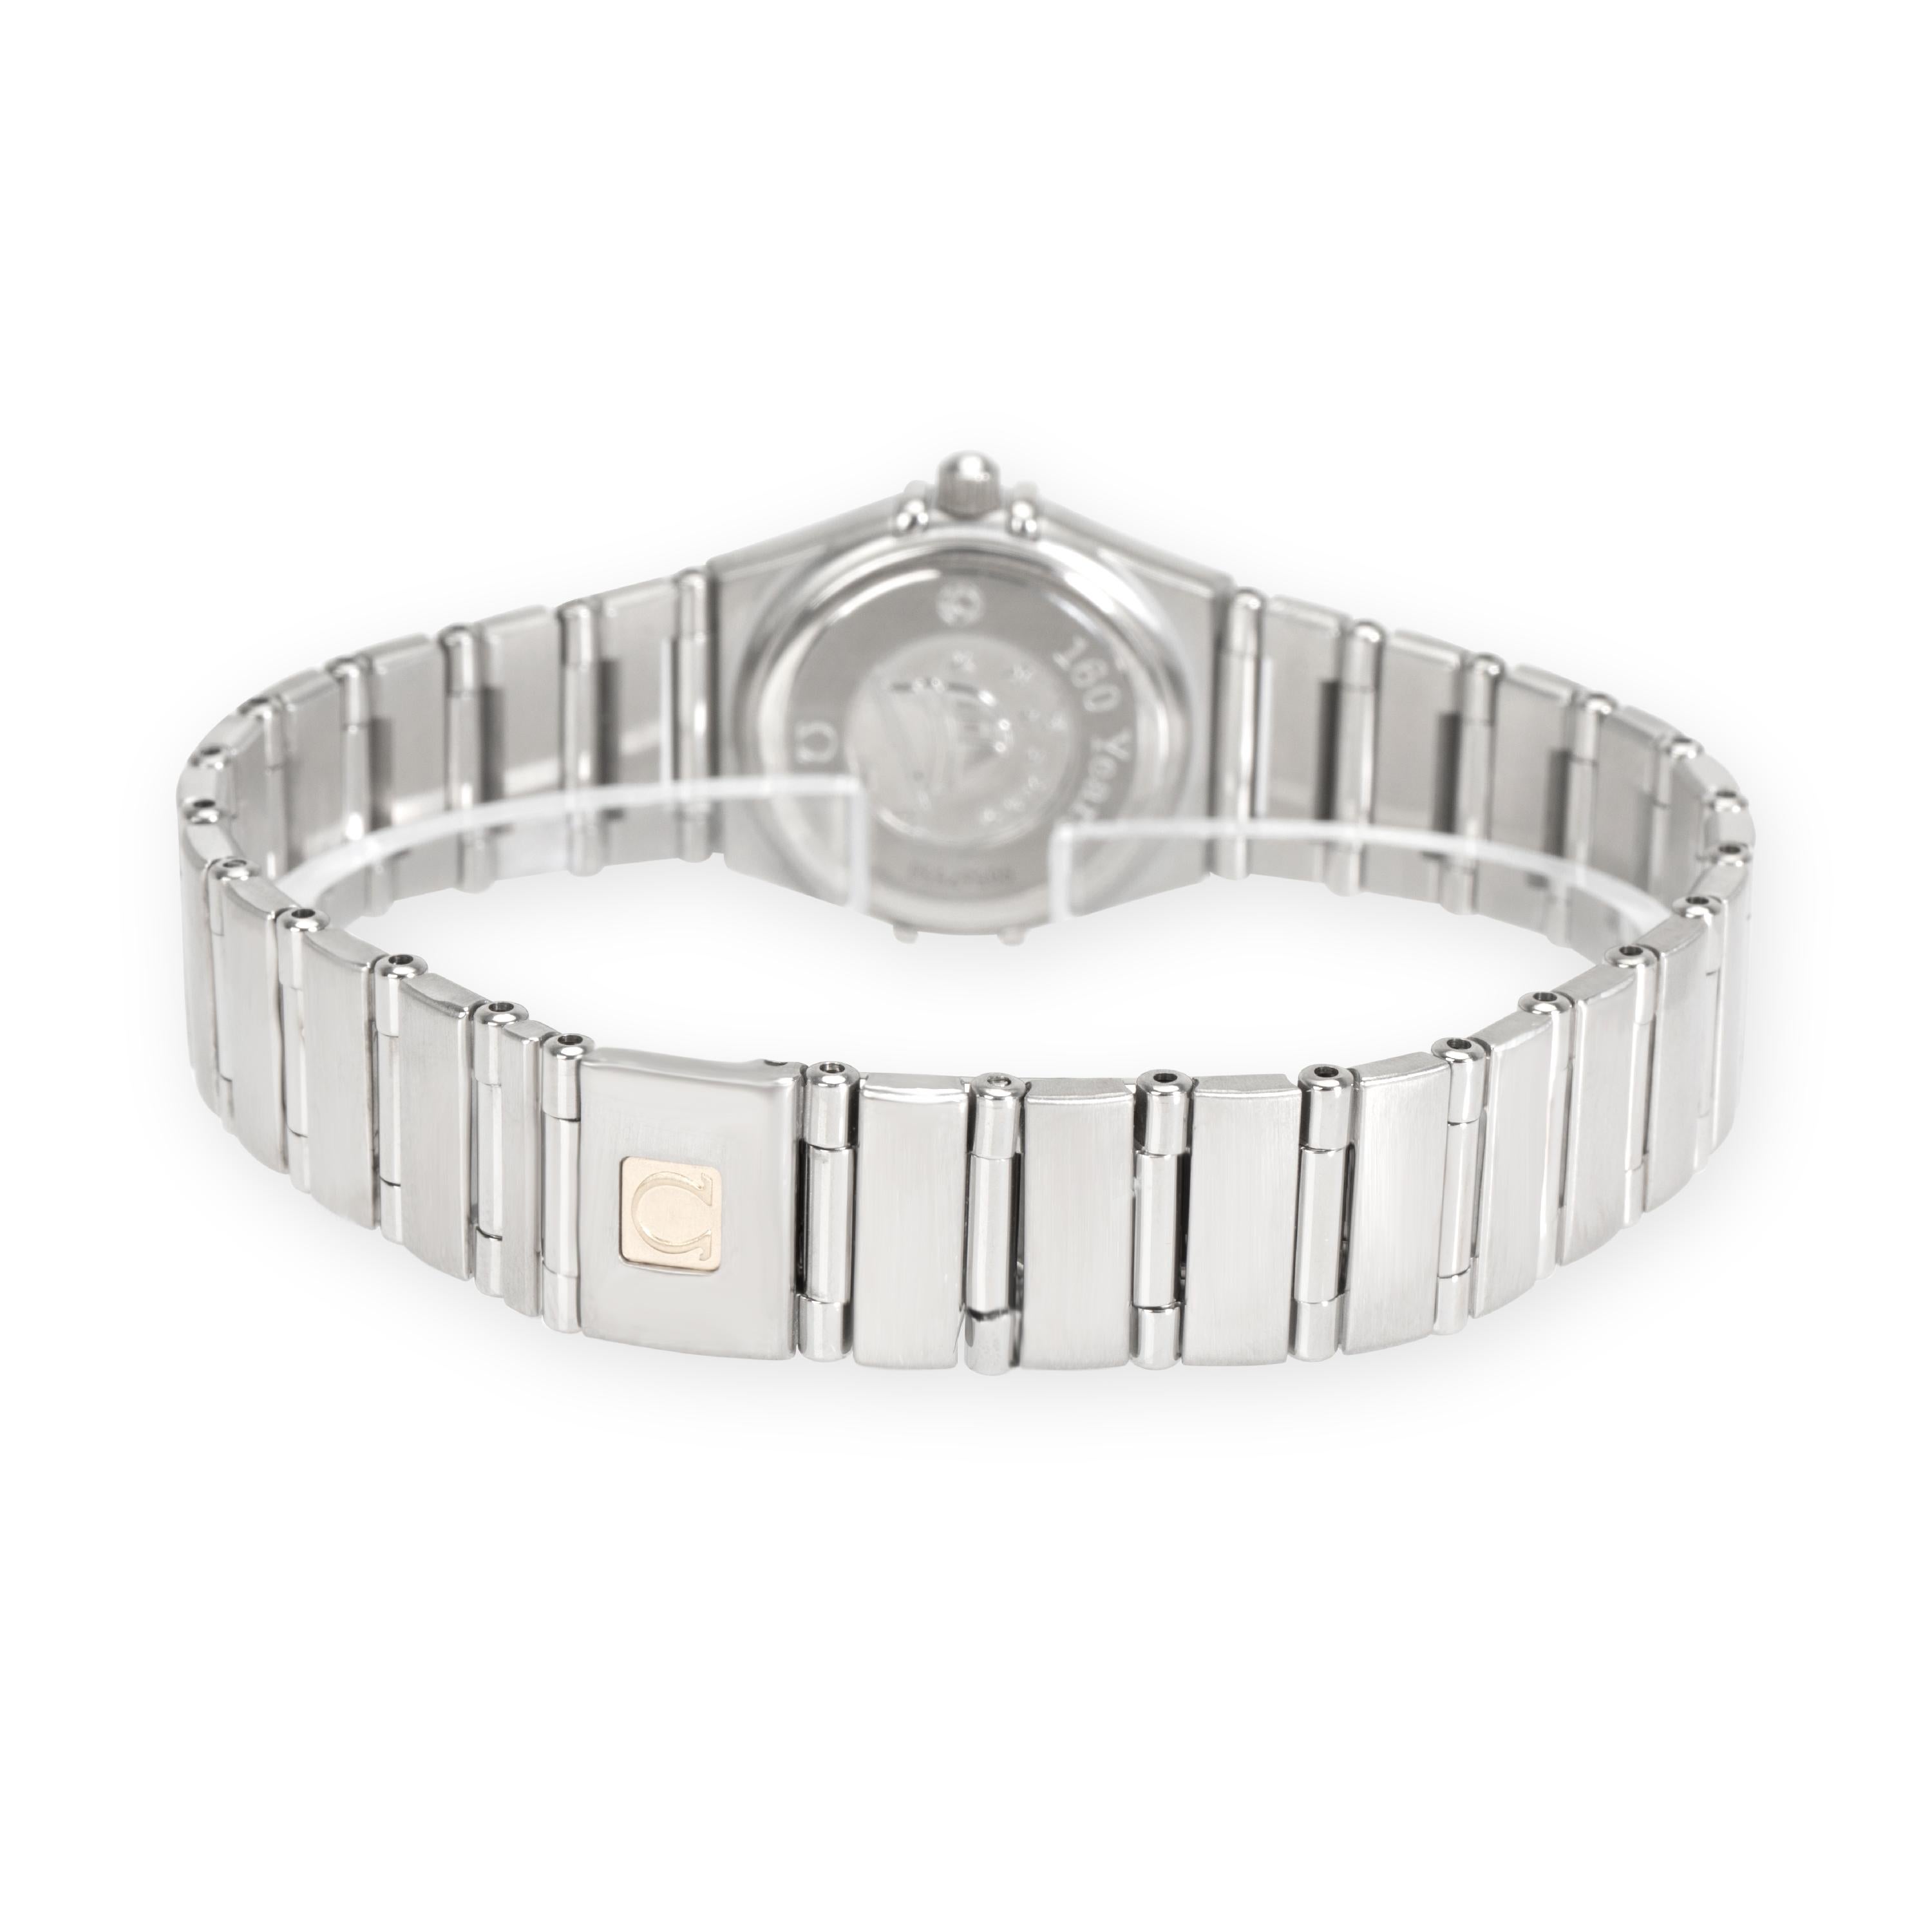 Omega Constellation 111.15.23.60.55.001 Women's Watch in Stainless Steel

SKU: 103951

PRIMARY DETAILS
Brand:  Omega
Model: Constellation
Country of Origin: Switzerland
Movement Type: Quartz: Battery
Year Manufactured: 2009
Year of Manufacture: